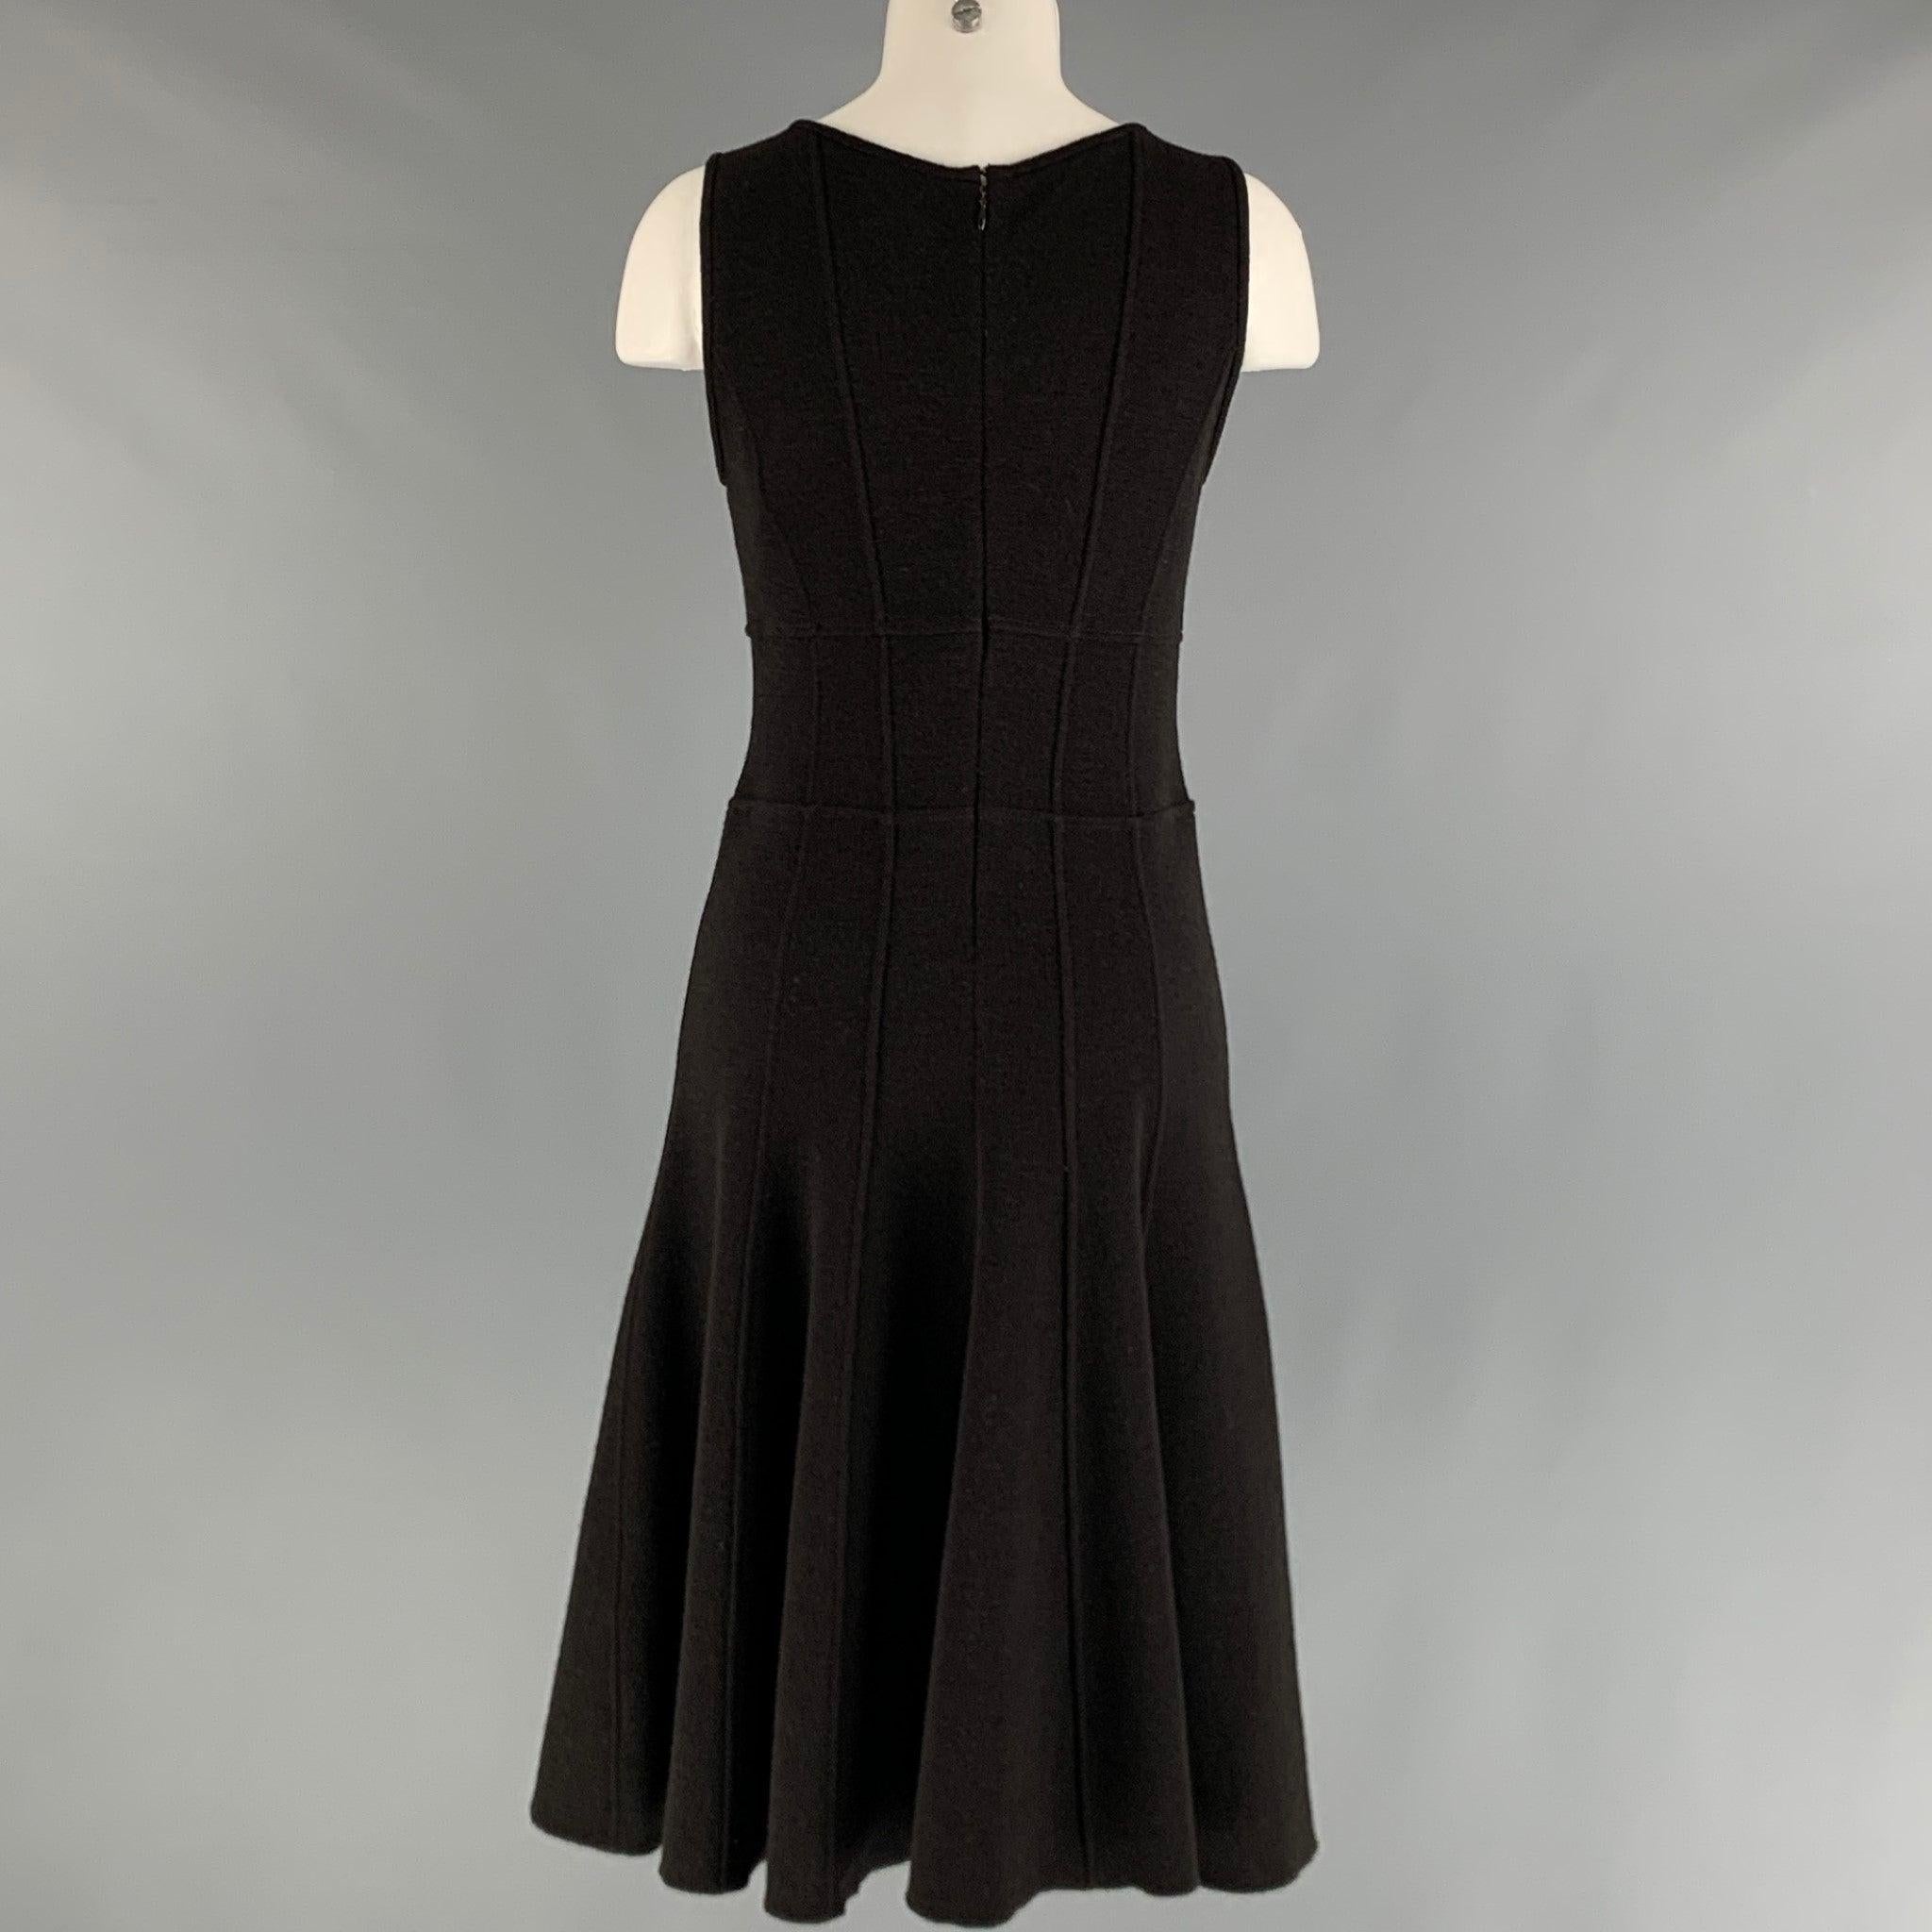 ARMANI COLLEZIONI Size 4 Black Wool Sleeveless Dress In Good Condition For Sale In San Francisco, CA